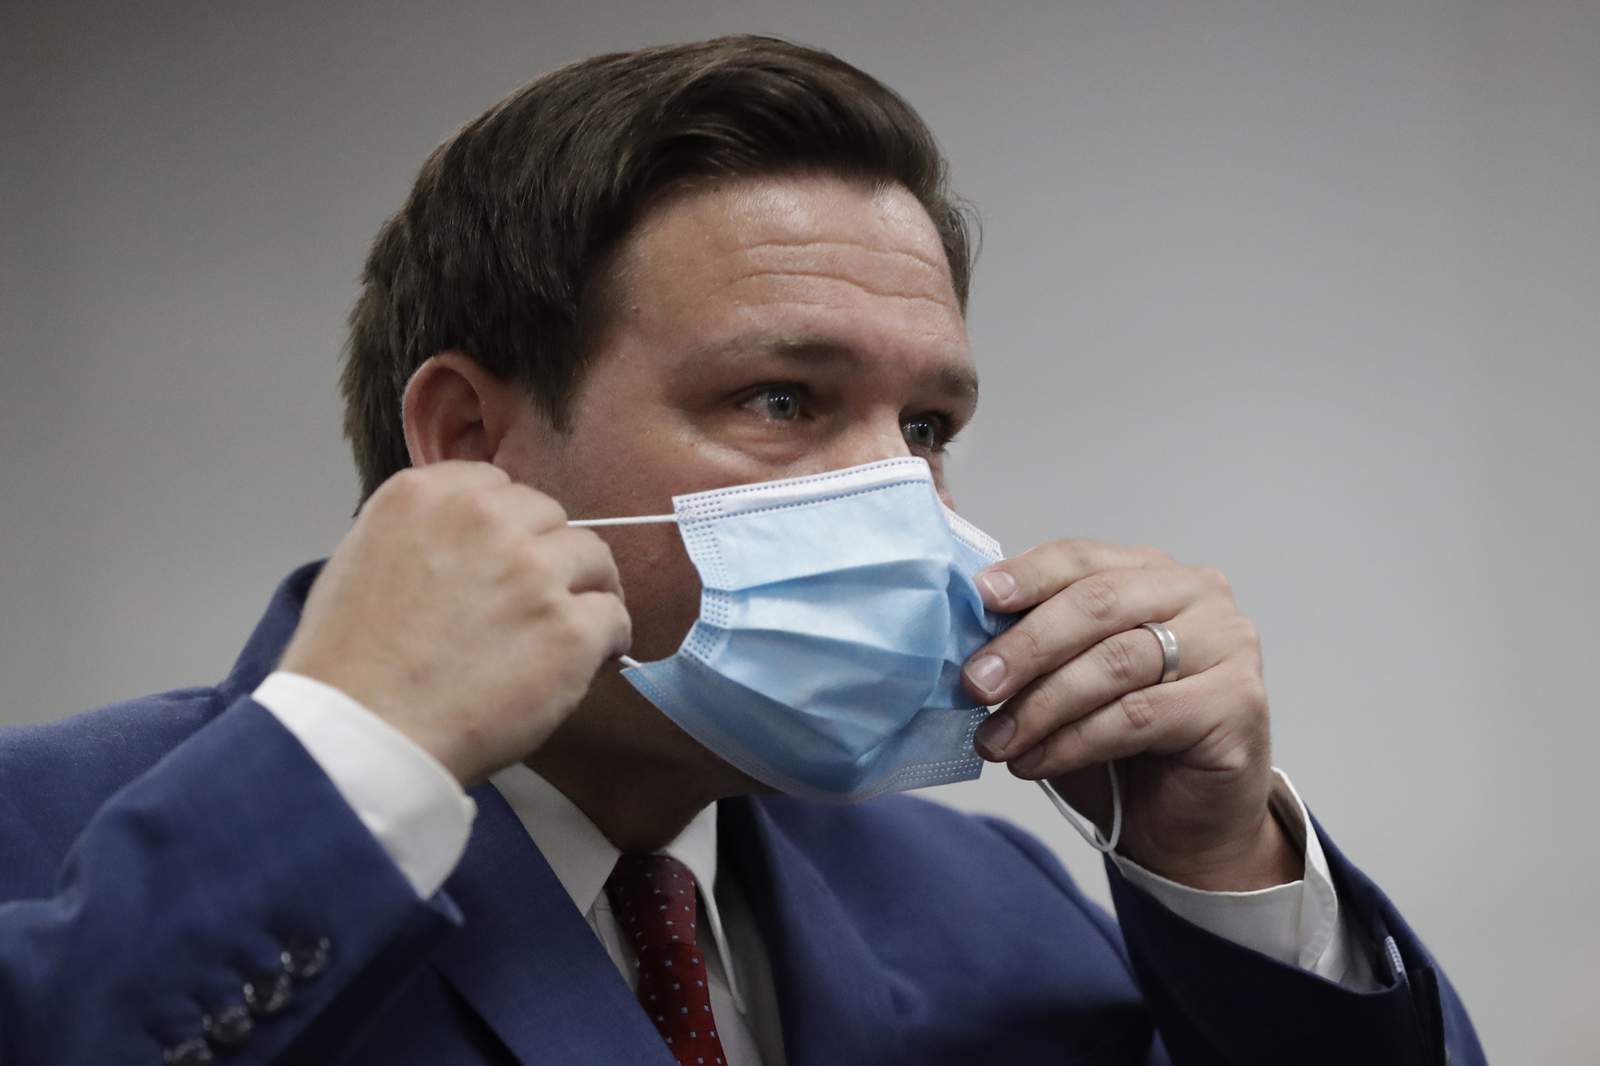 LIVE: Gov. DeSantis holding COVID-19 news conference in Tallahassee